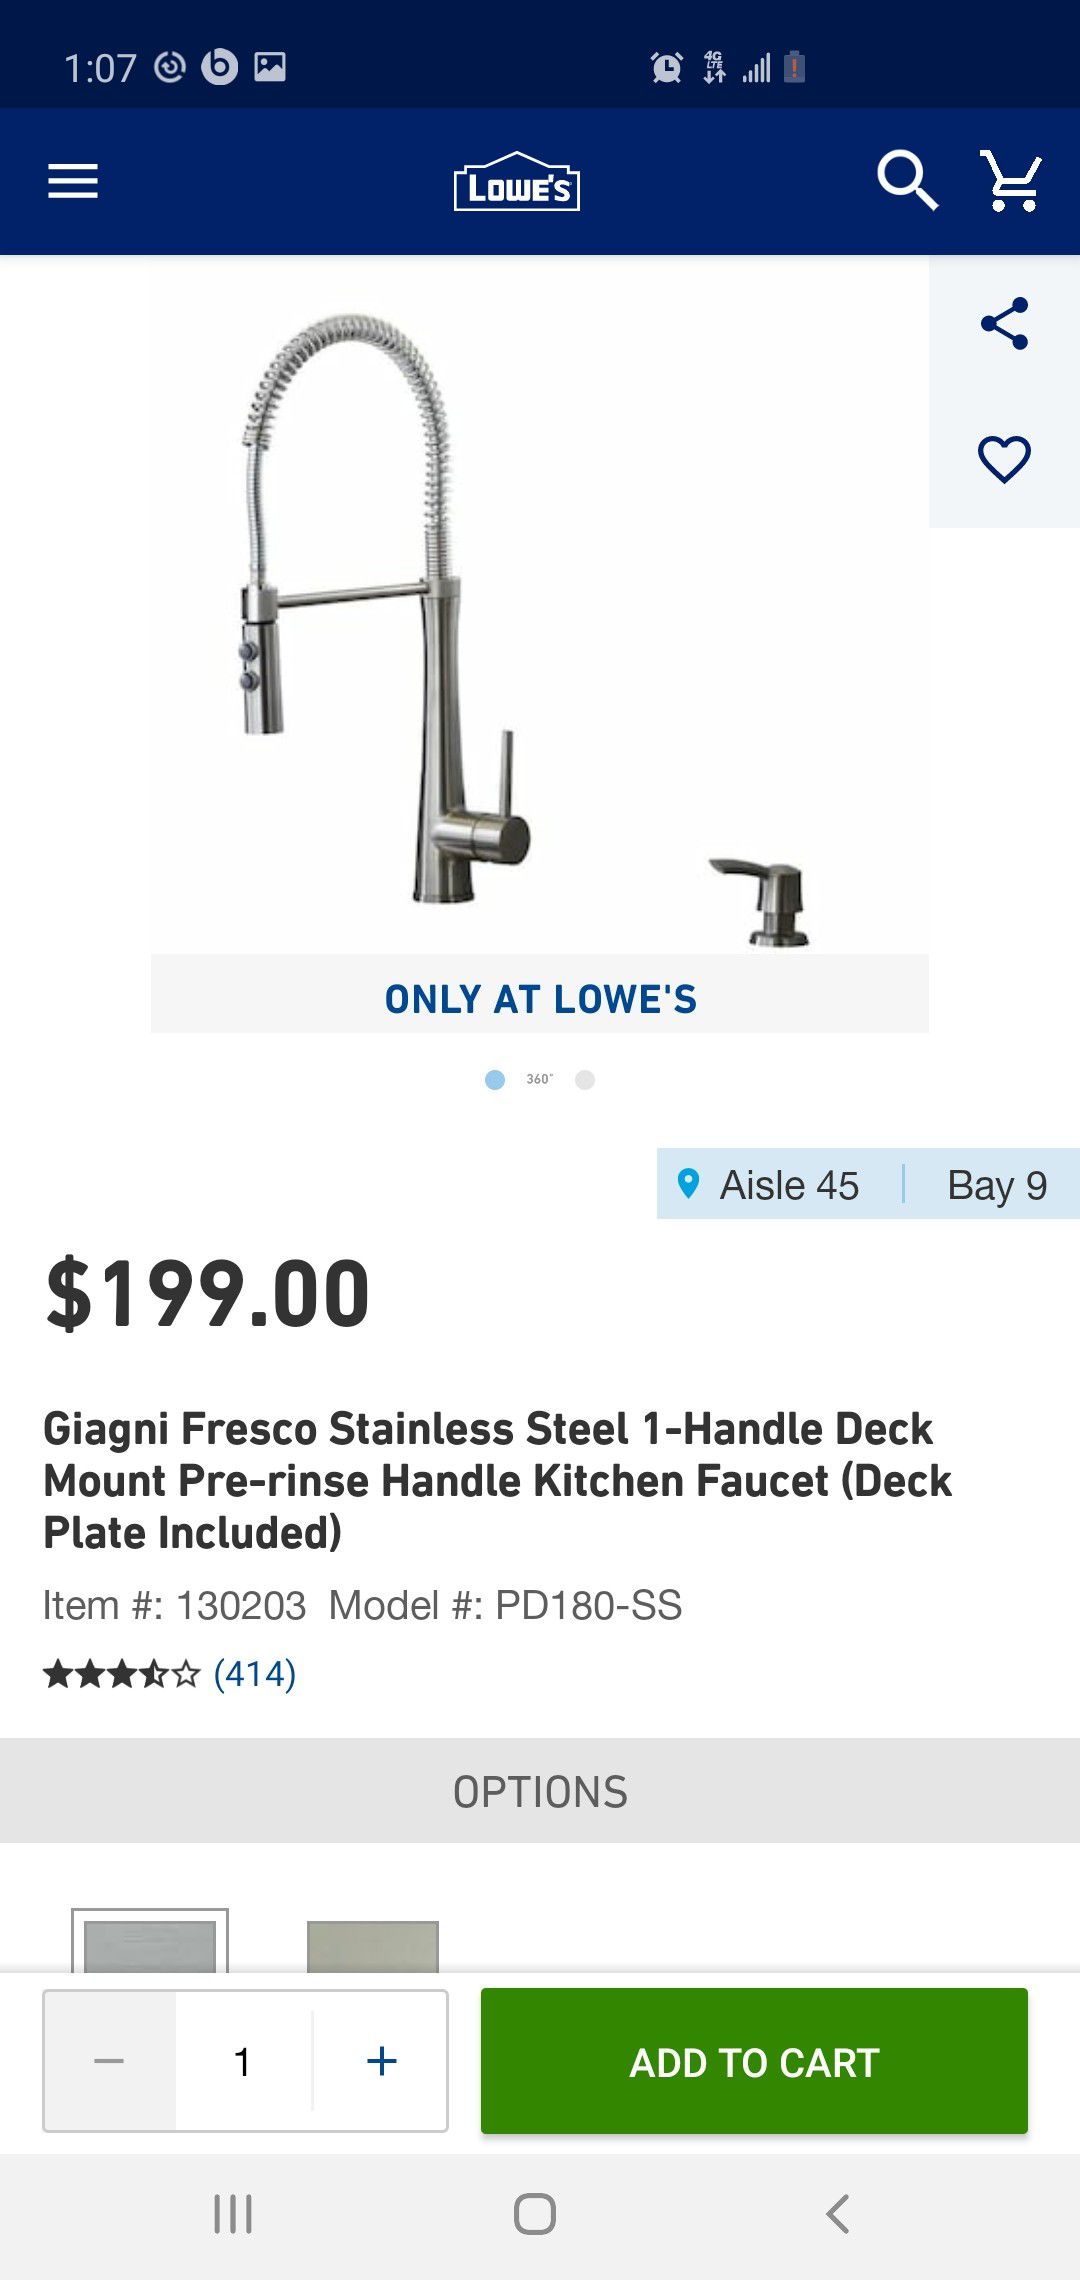 New in the box kitchen faucet